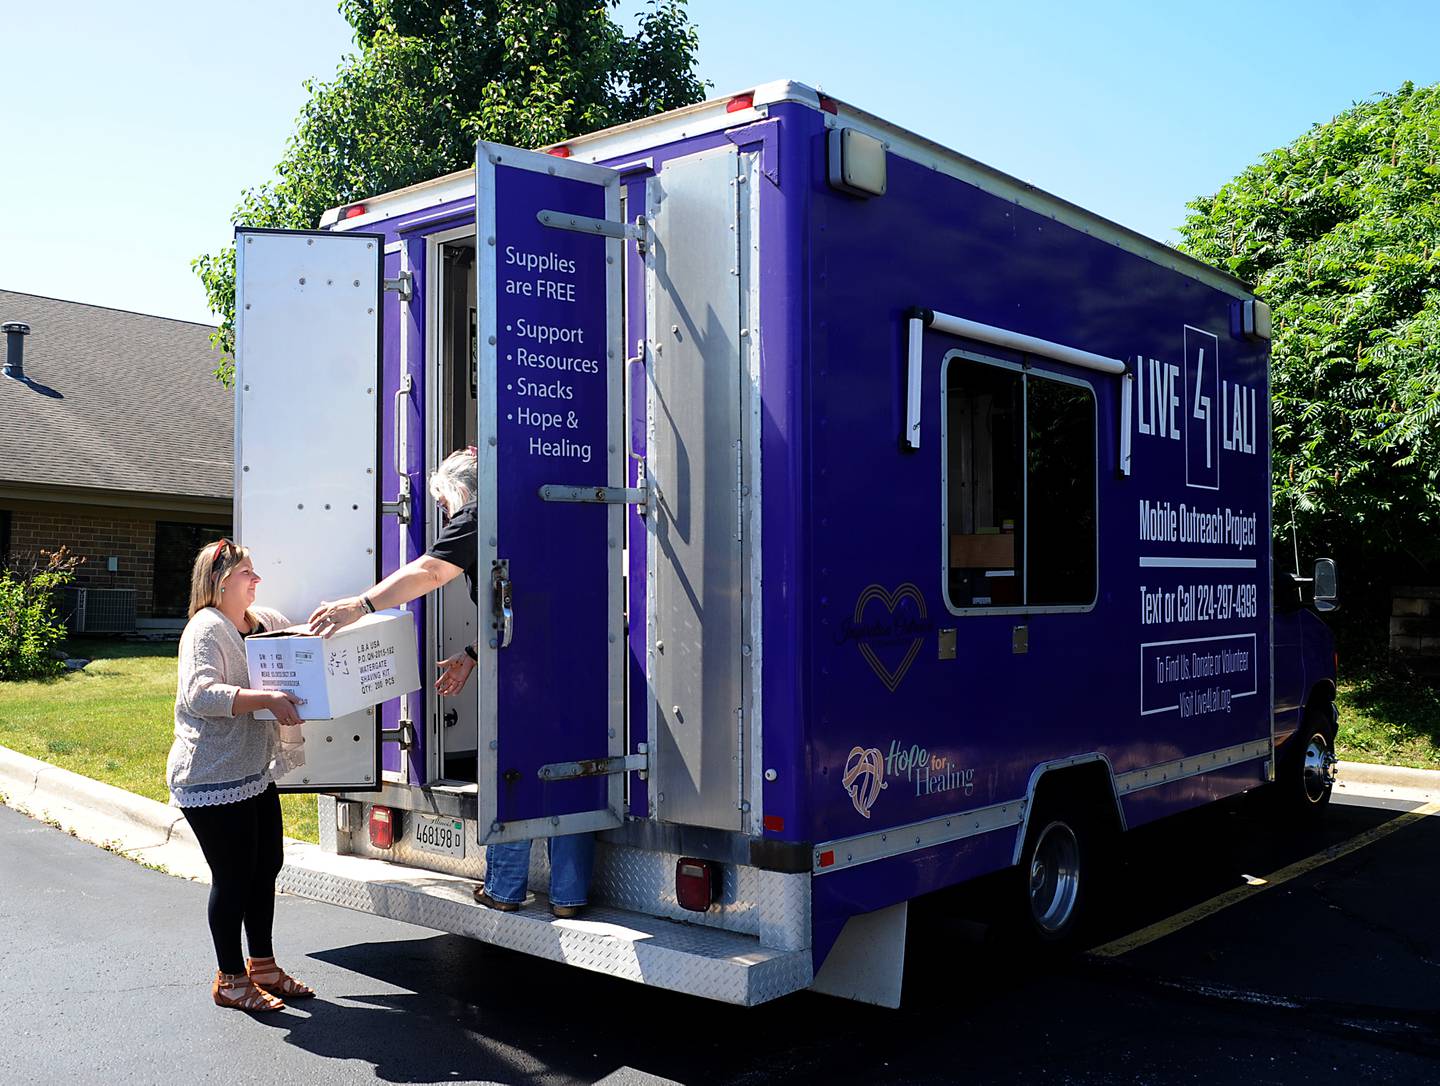 Stefanie Gattone, the McHenry County program manager of Live4Lali, hands a box to Laura Fry, the nonprofit's executive director, as they load supplies on their truck before a meeting Monday, June 27, 2022, of the McHenry County Substance Abuse Coalition in Crystal Lake. Live4Lali is one of nearly 60 agencies being asked how McHenry County should spend the Big Pharma settlement in battling opioid addiction in McHenry County.